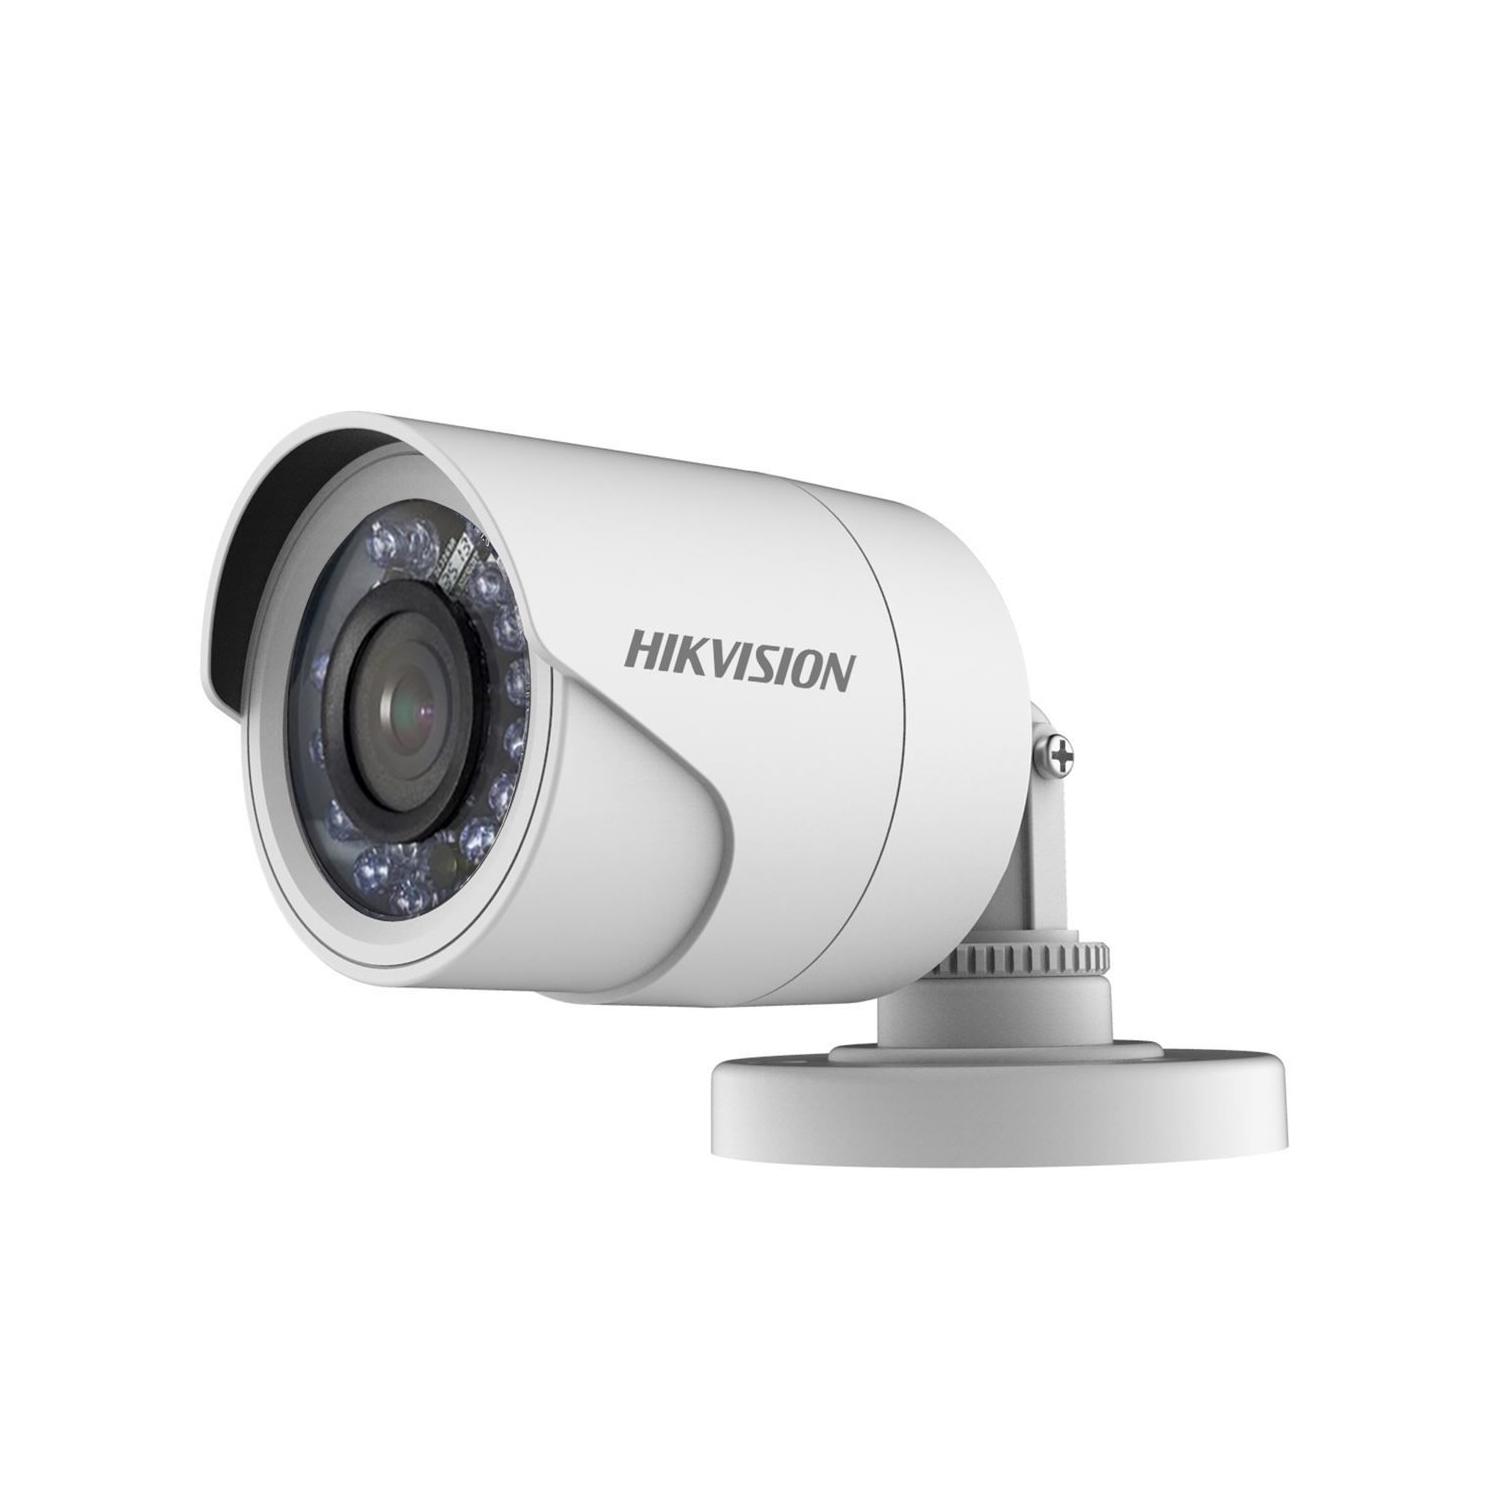 AHD KAMERA IR BULLET 2MP 3.6MM 4IN1 METAL 1080P HIKVISION DS-2CE16D0T-IRF